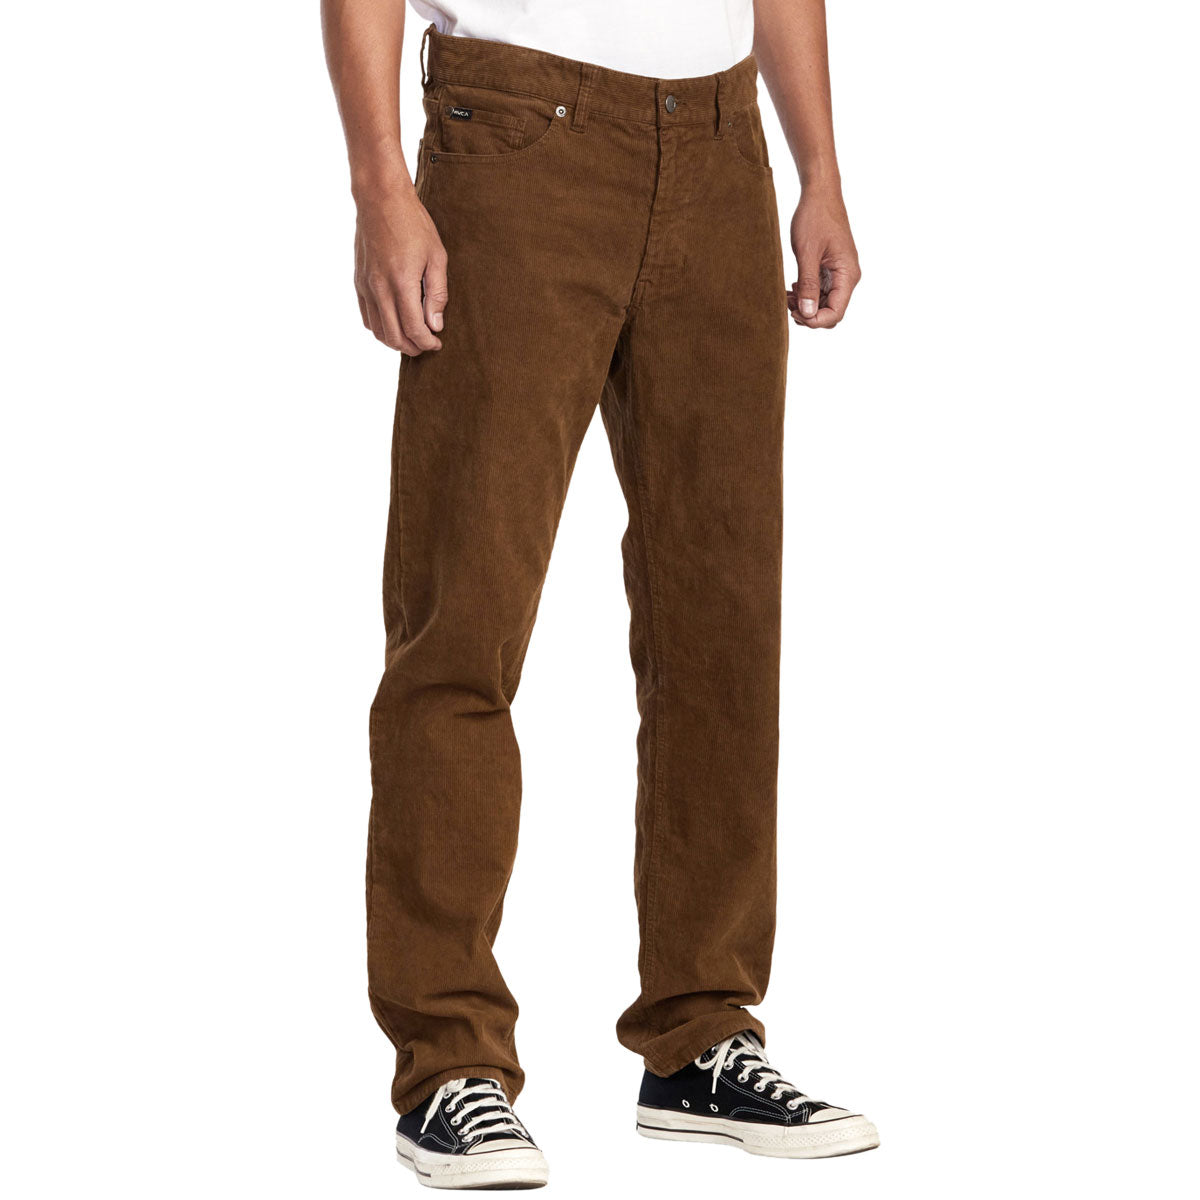 RVCA Daggers Pigment Cord Pants - Bombay Brown image 3